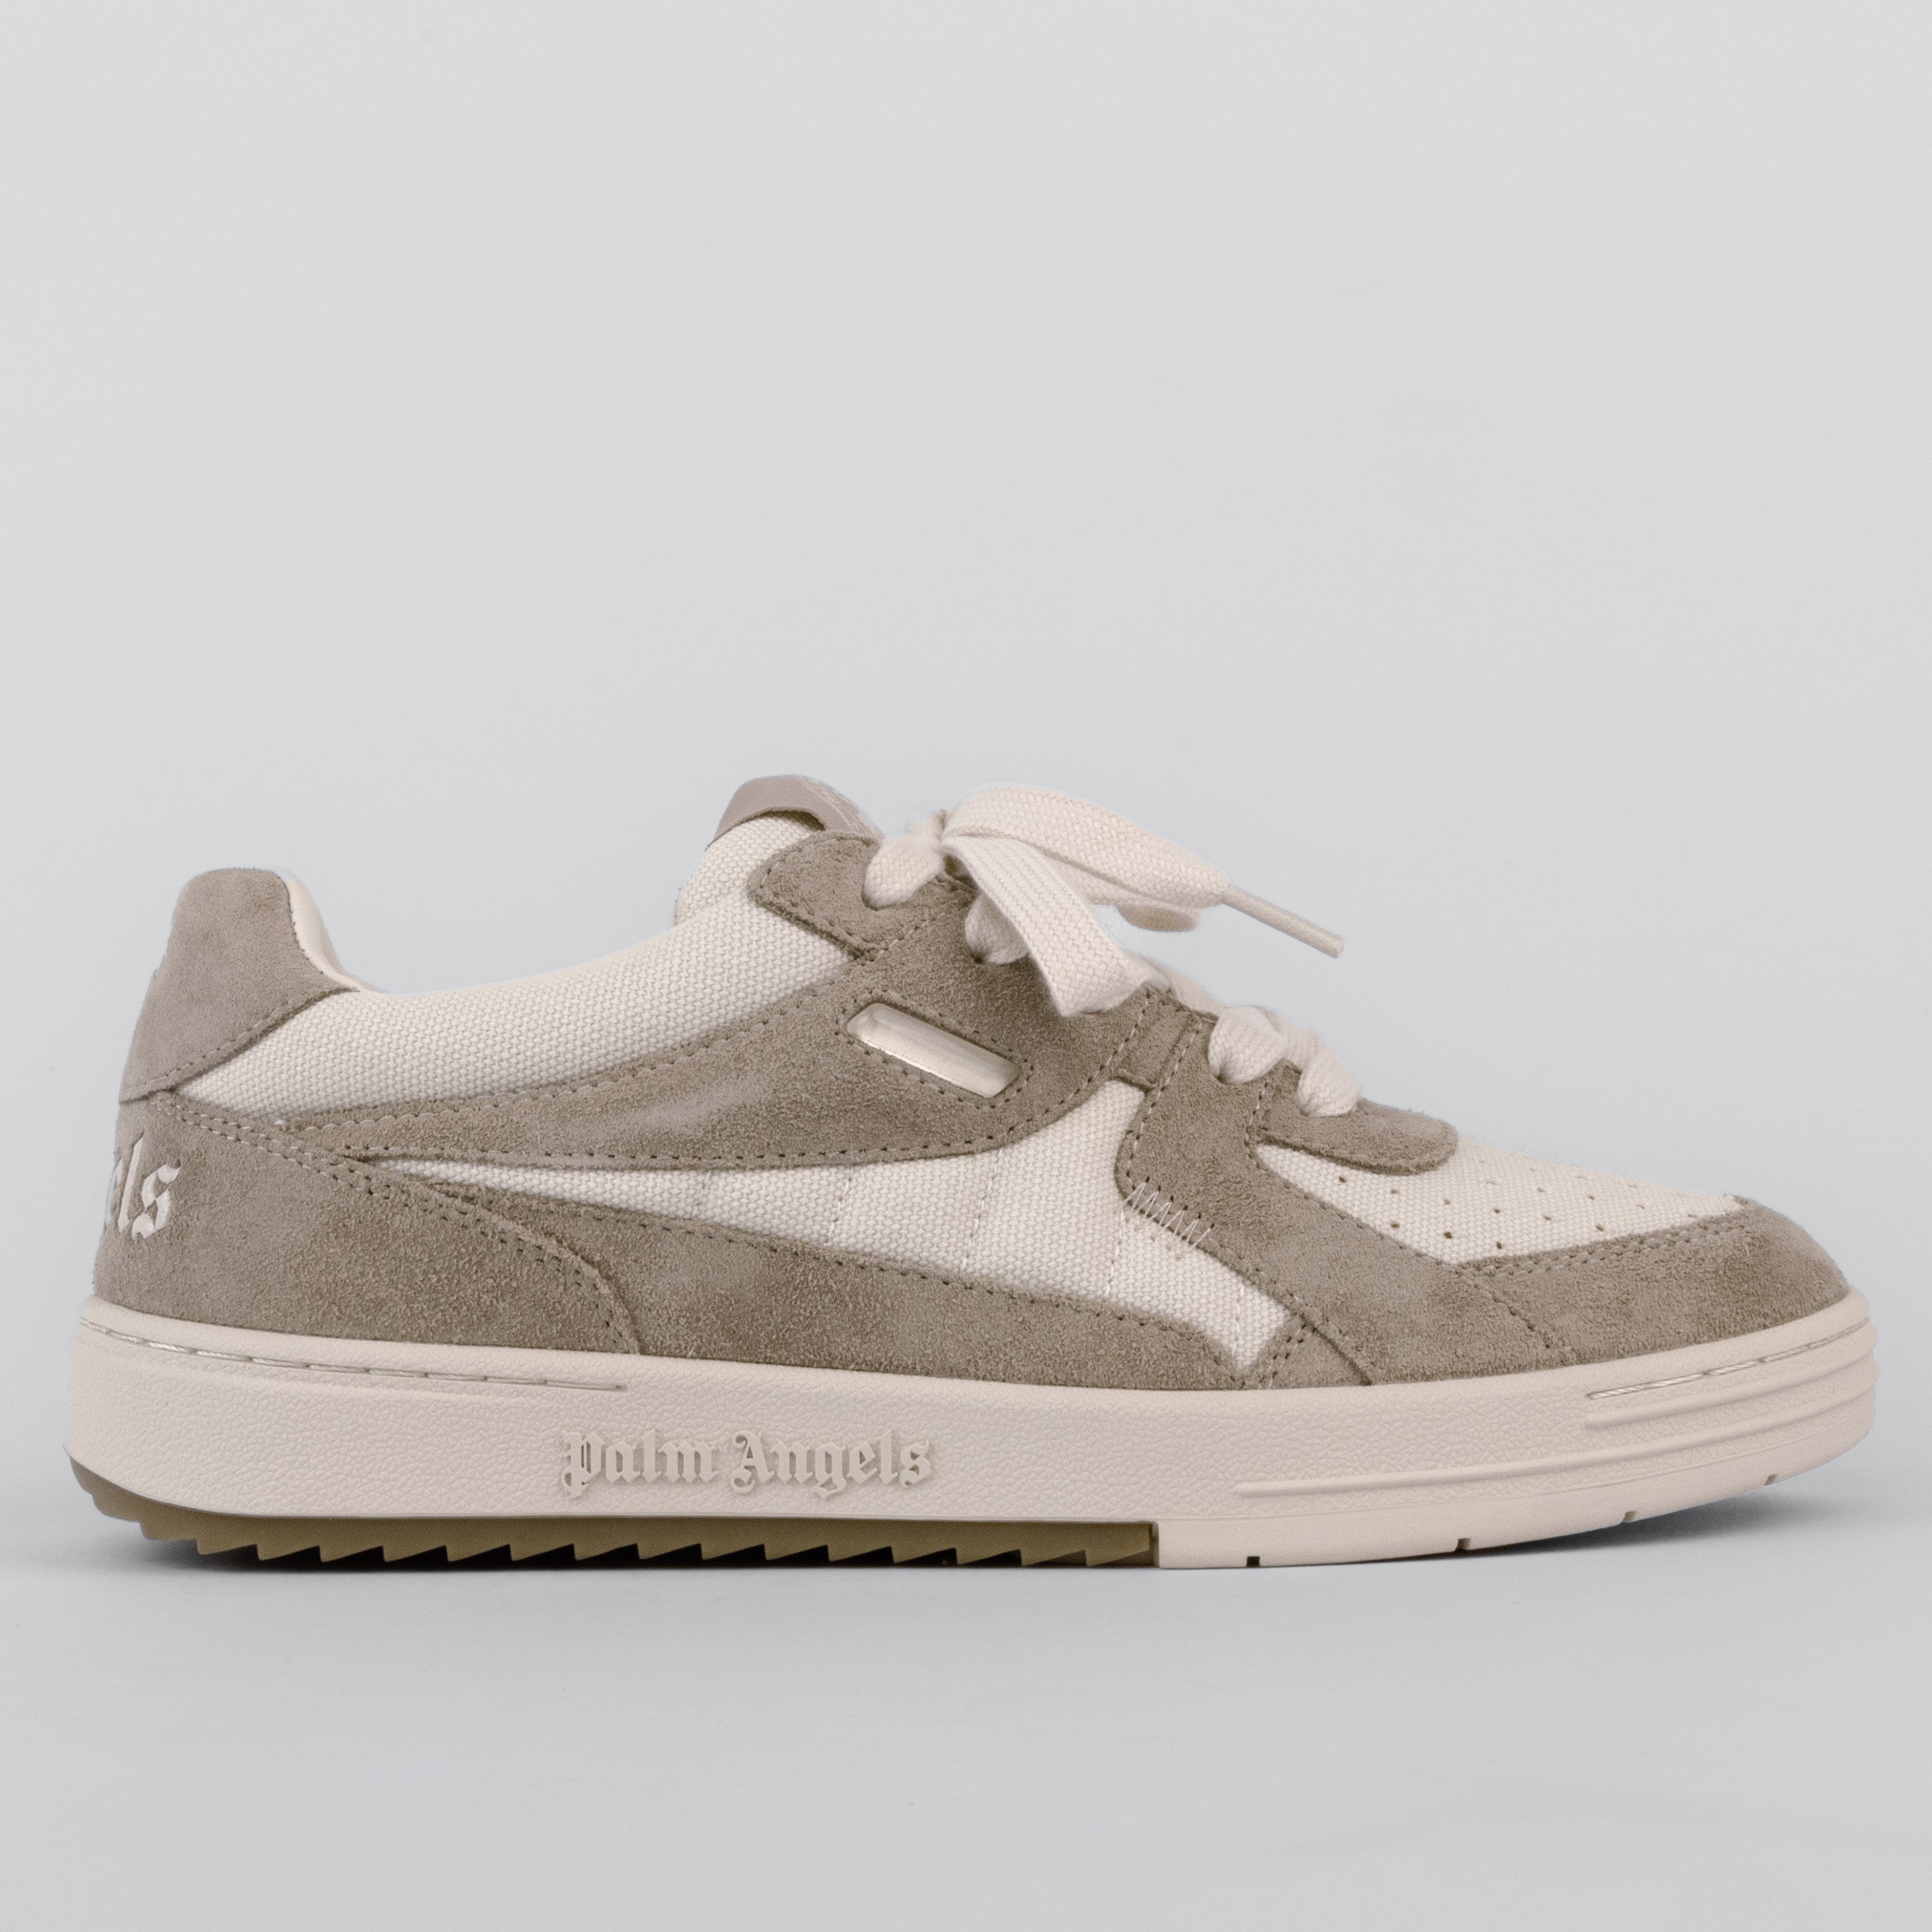 Sneakers Blanco/Camel Palm Angels Palm University Lt Auth Suede